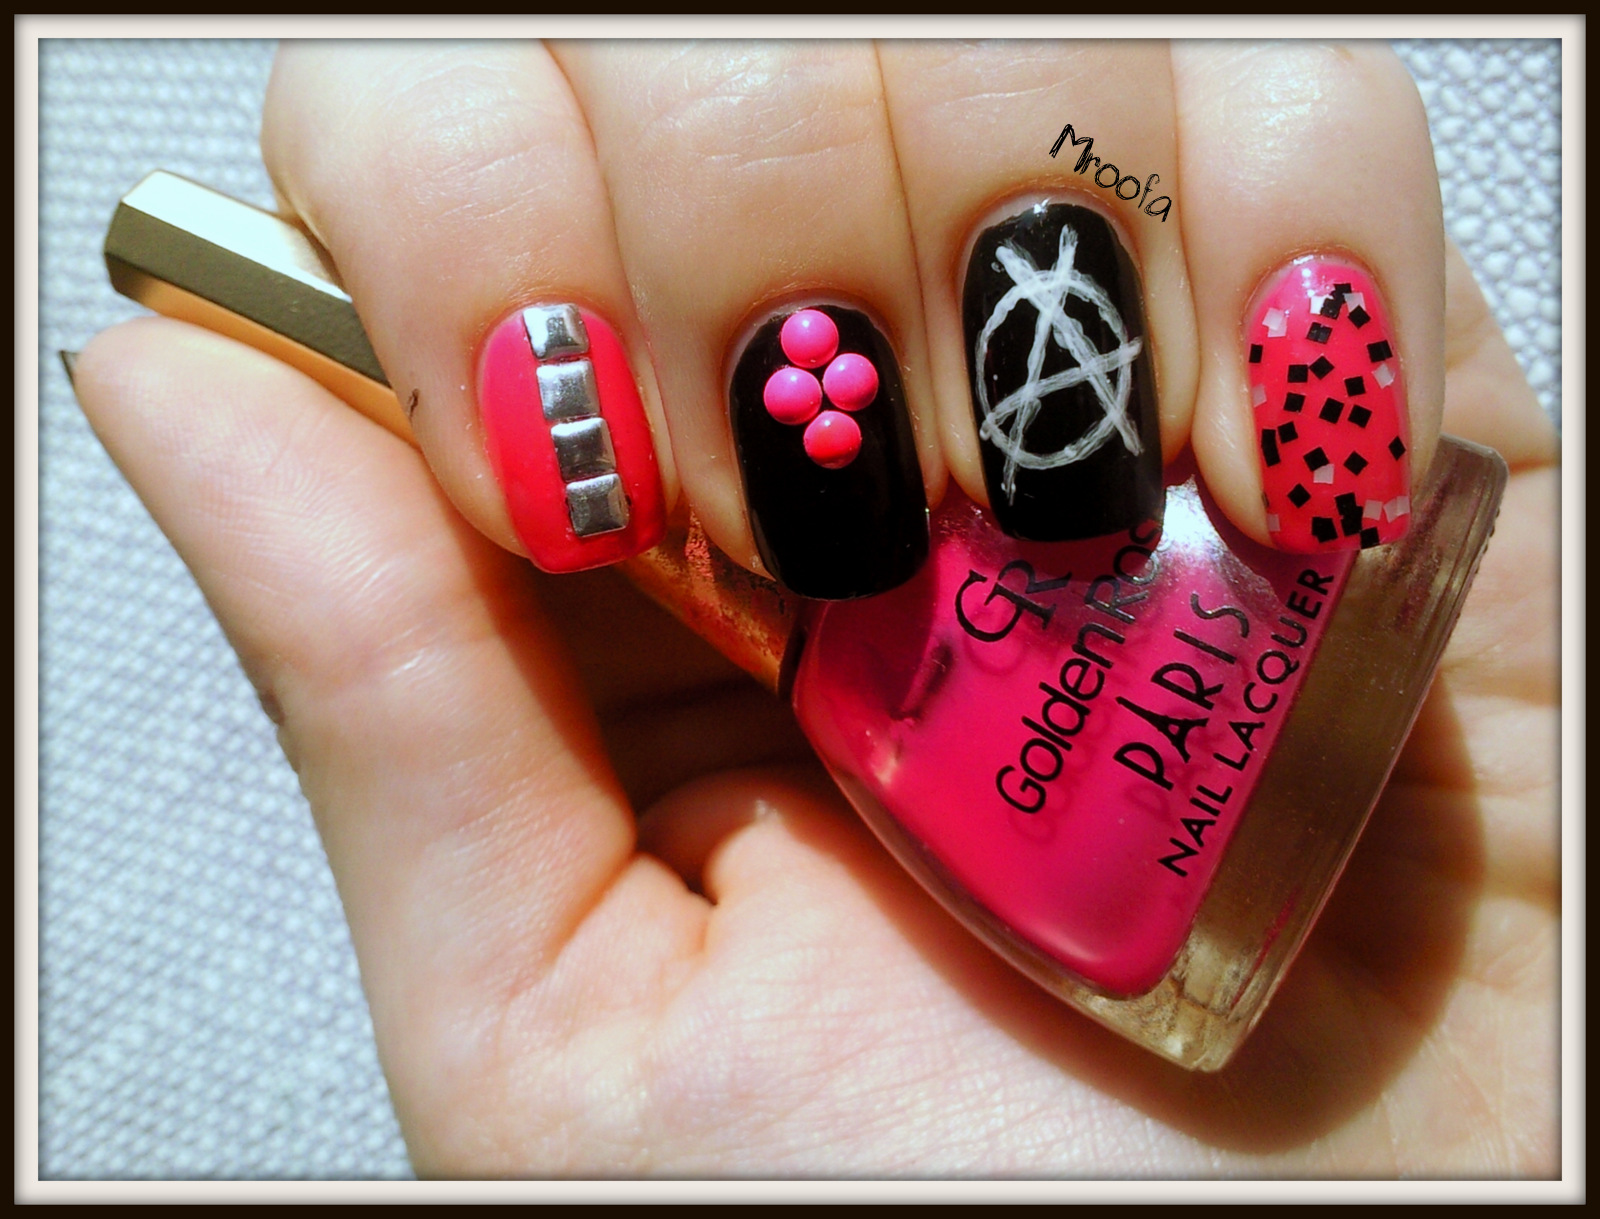 1. "Studded Punk Rock Nails" - wide 10